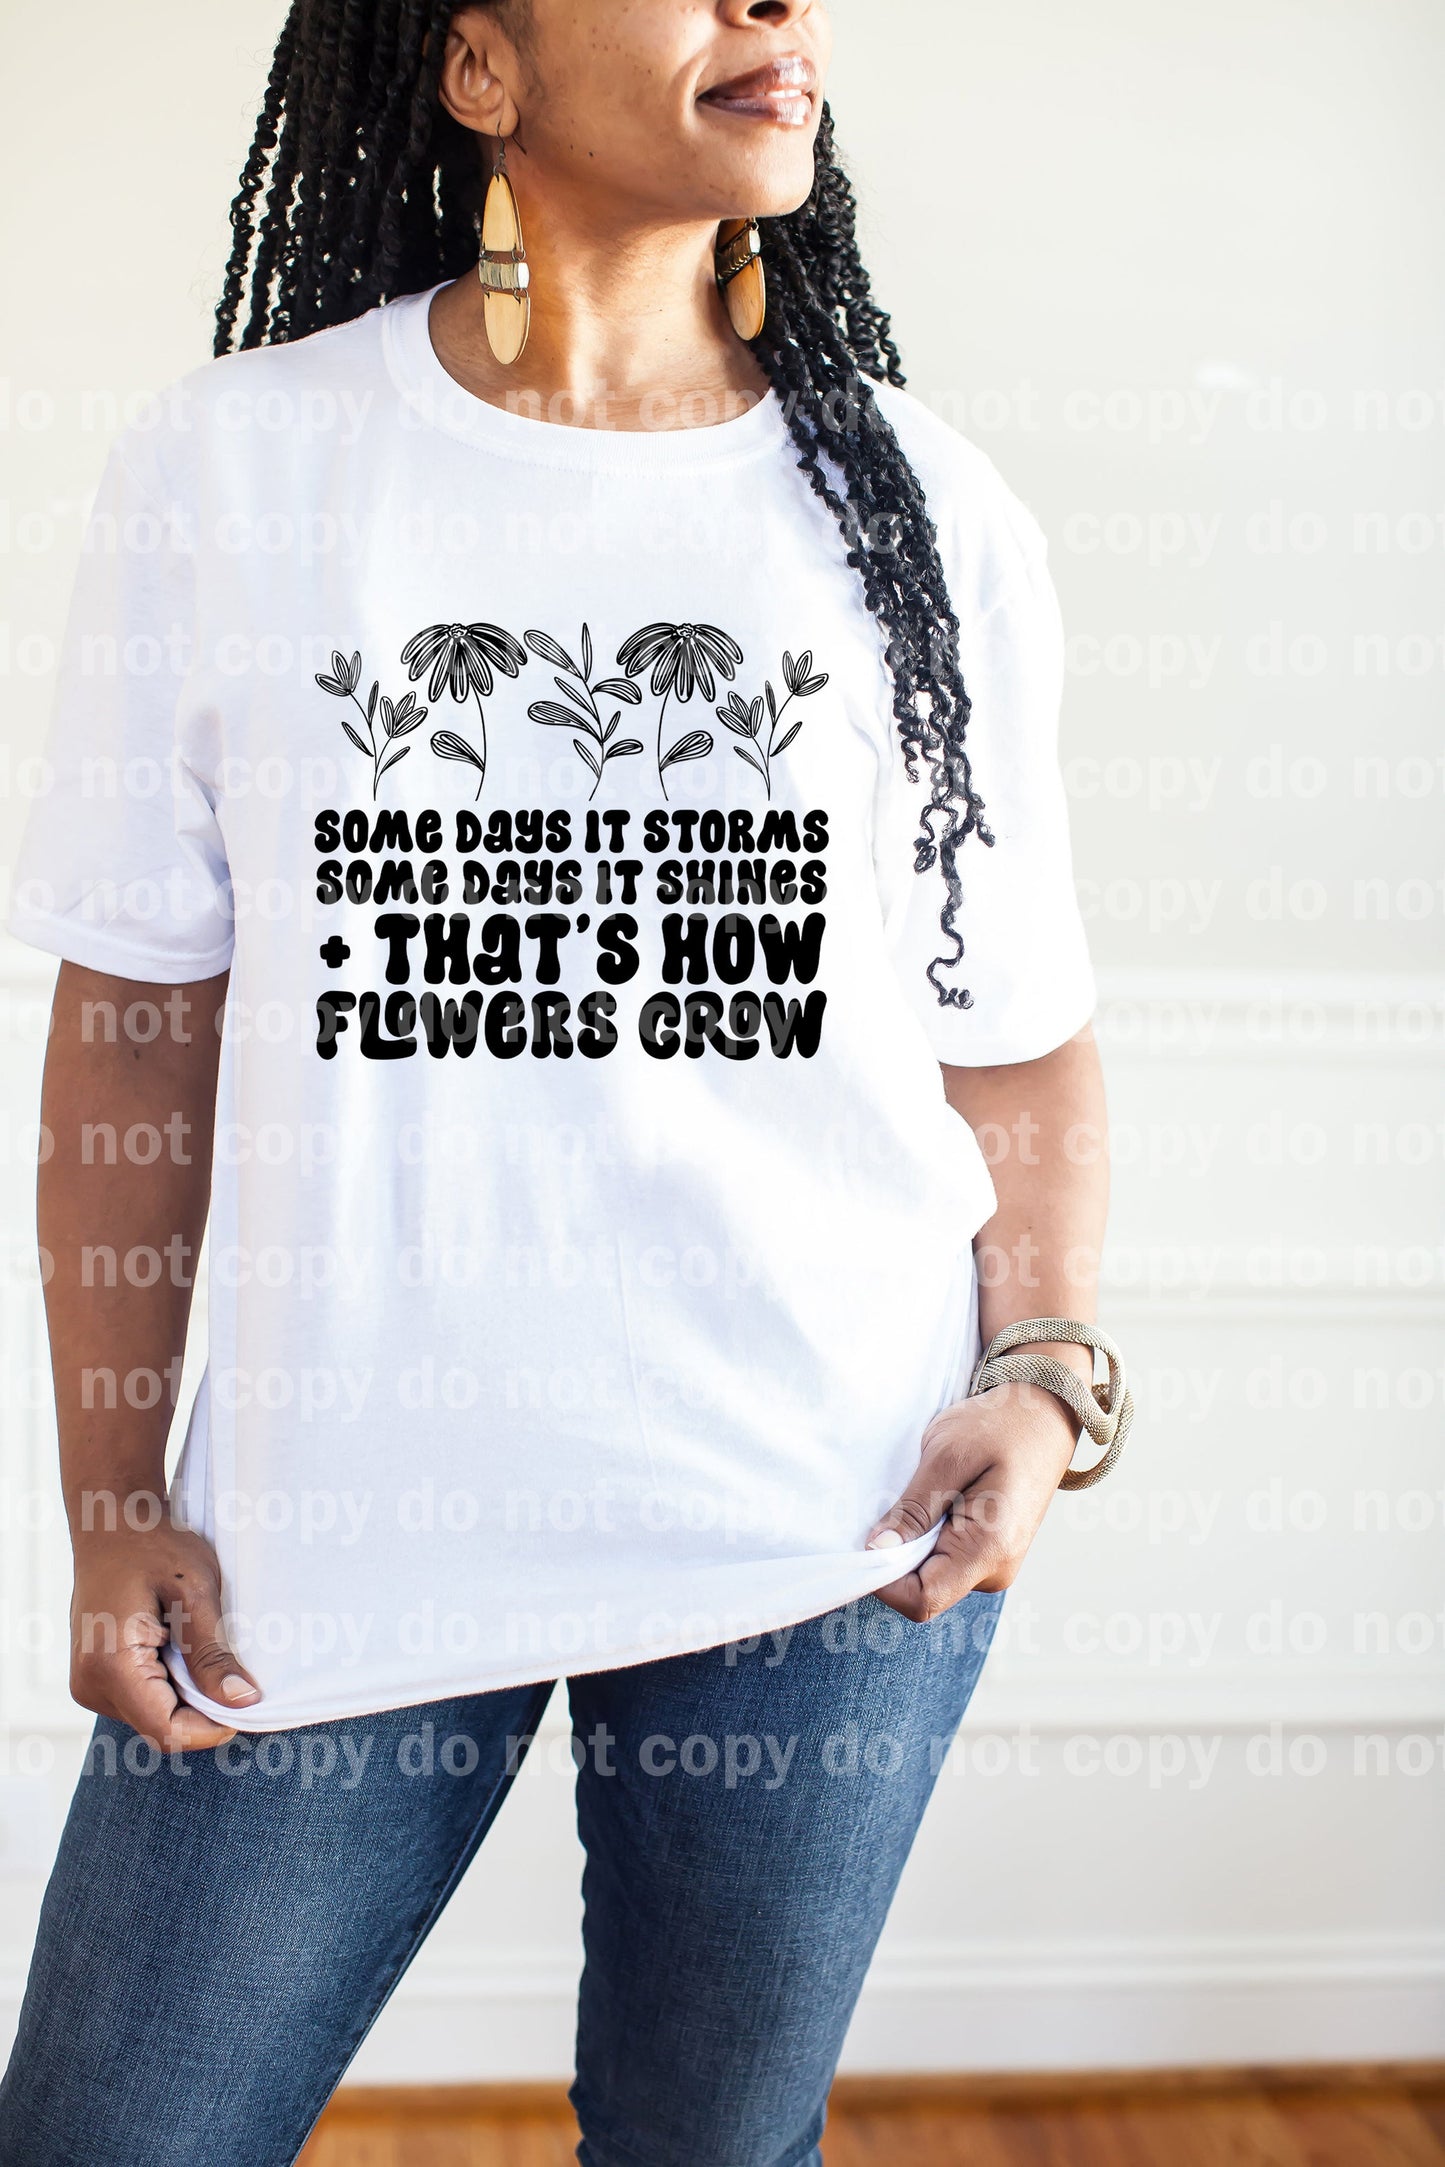 Some Days It Storms Some Days It Shines That's How Flowers Grow Full Color/One Color Dream Print or Sublimation Print